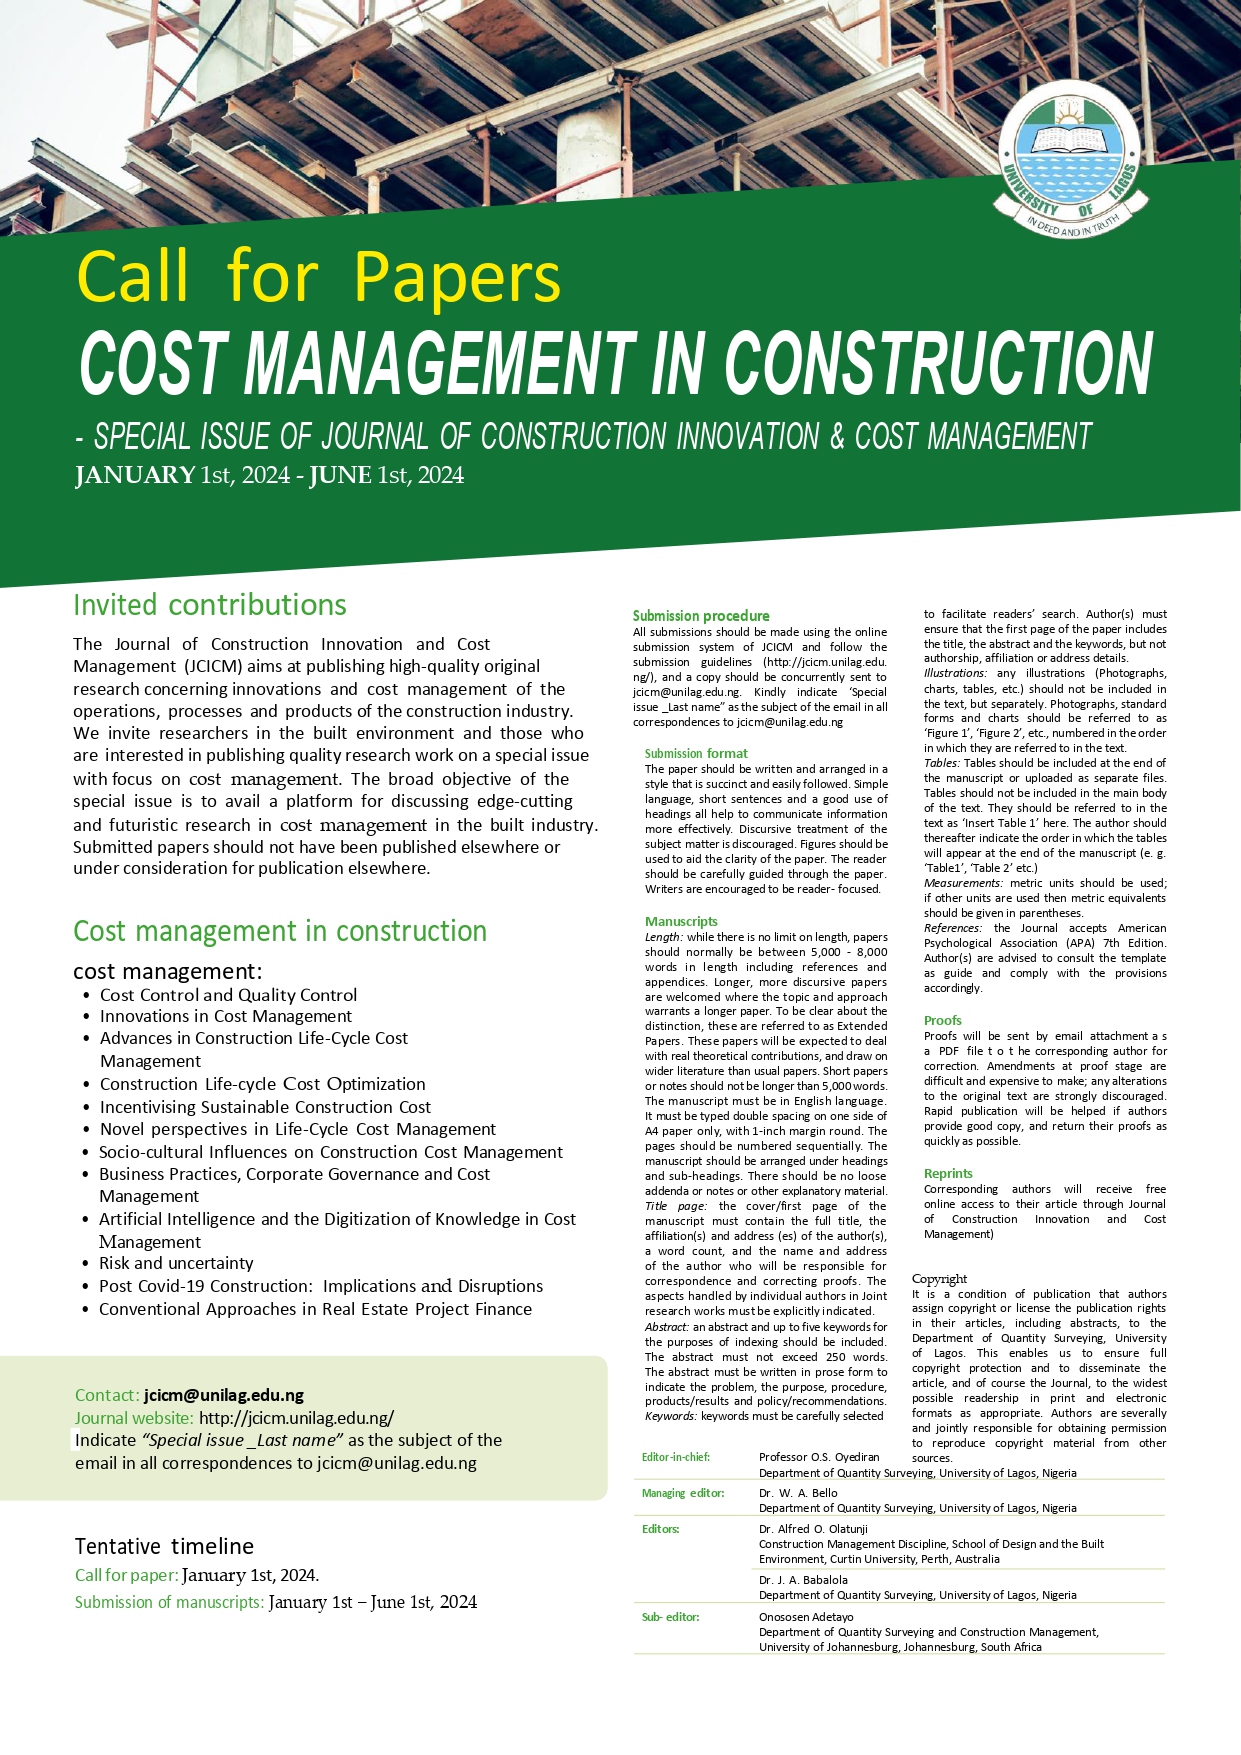 JCICM_CALL_FOR_PAPERS_COST_MANAGEMENT_page-00011.jpg